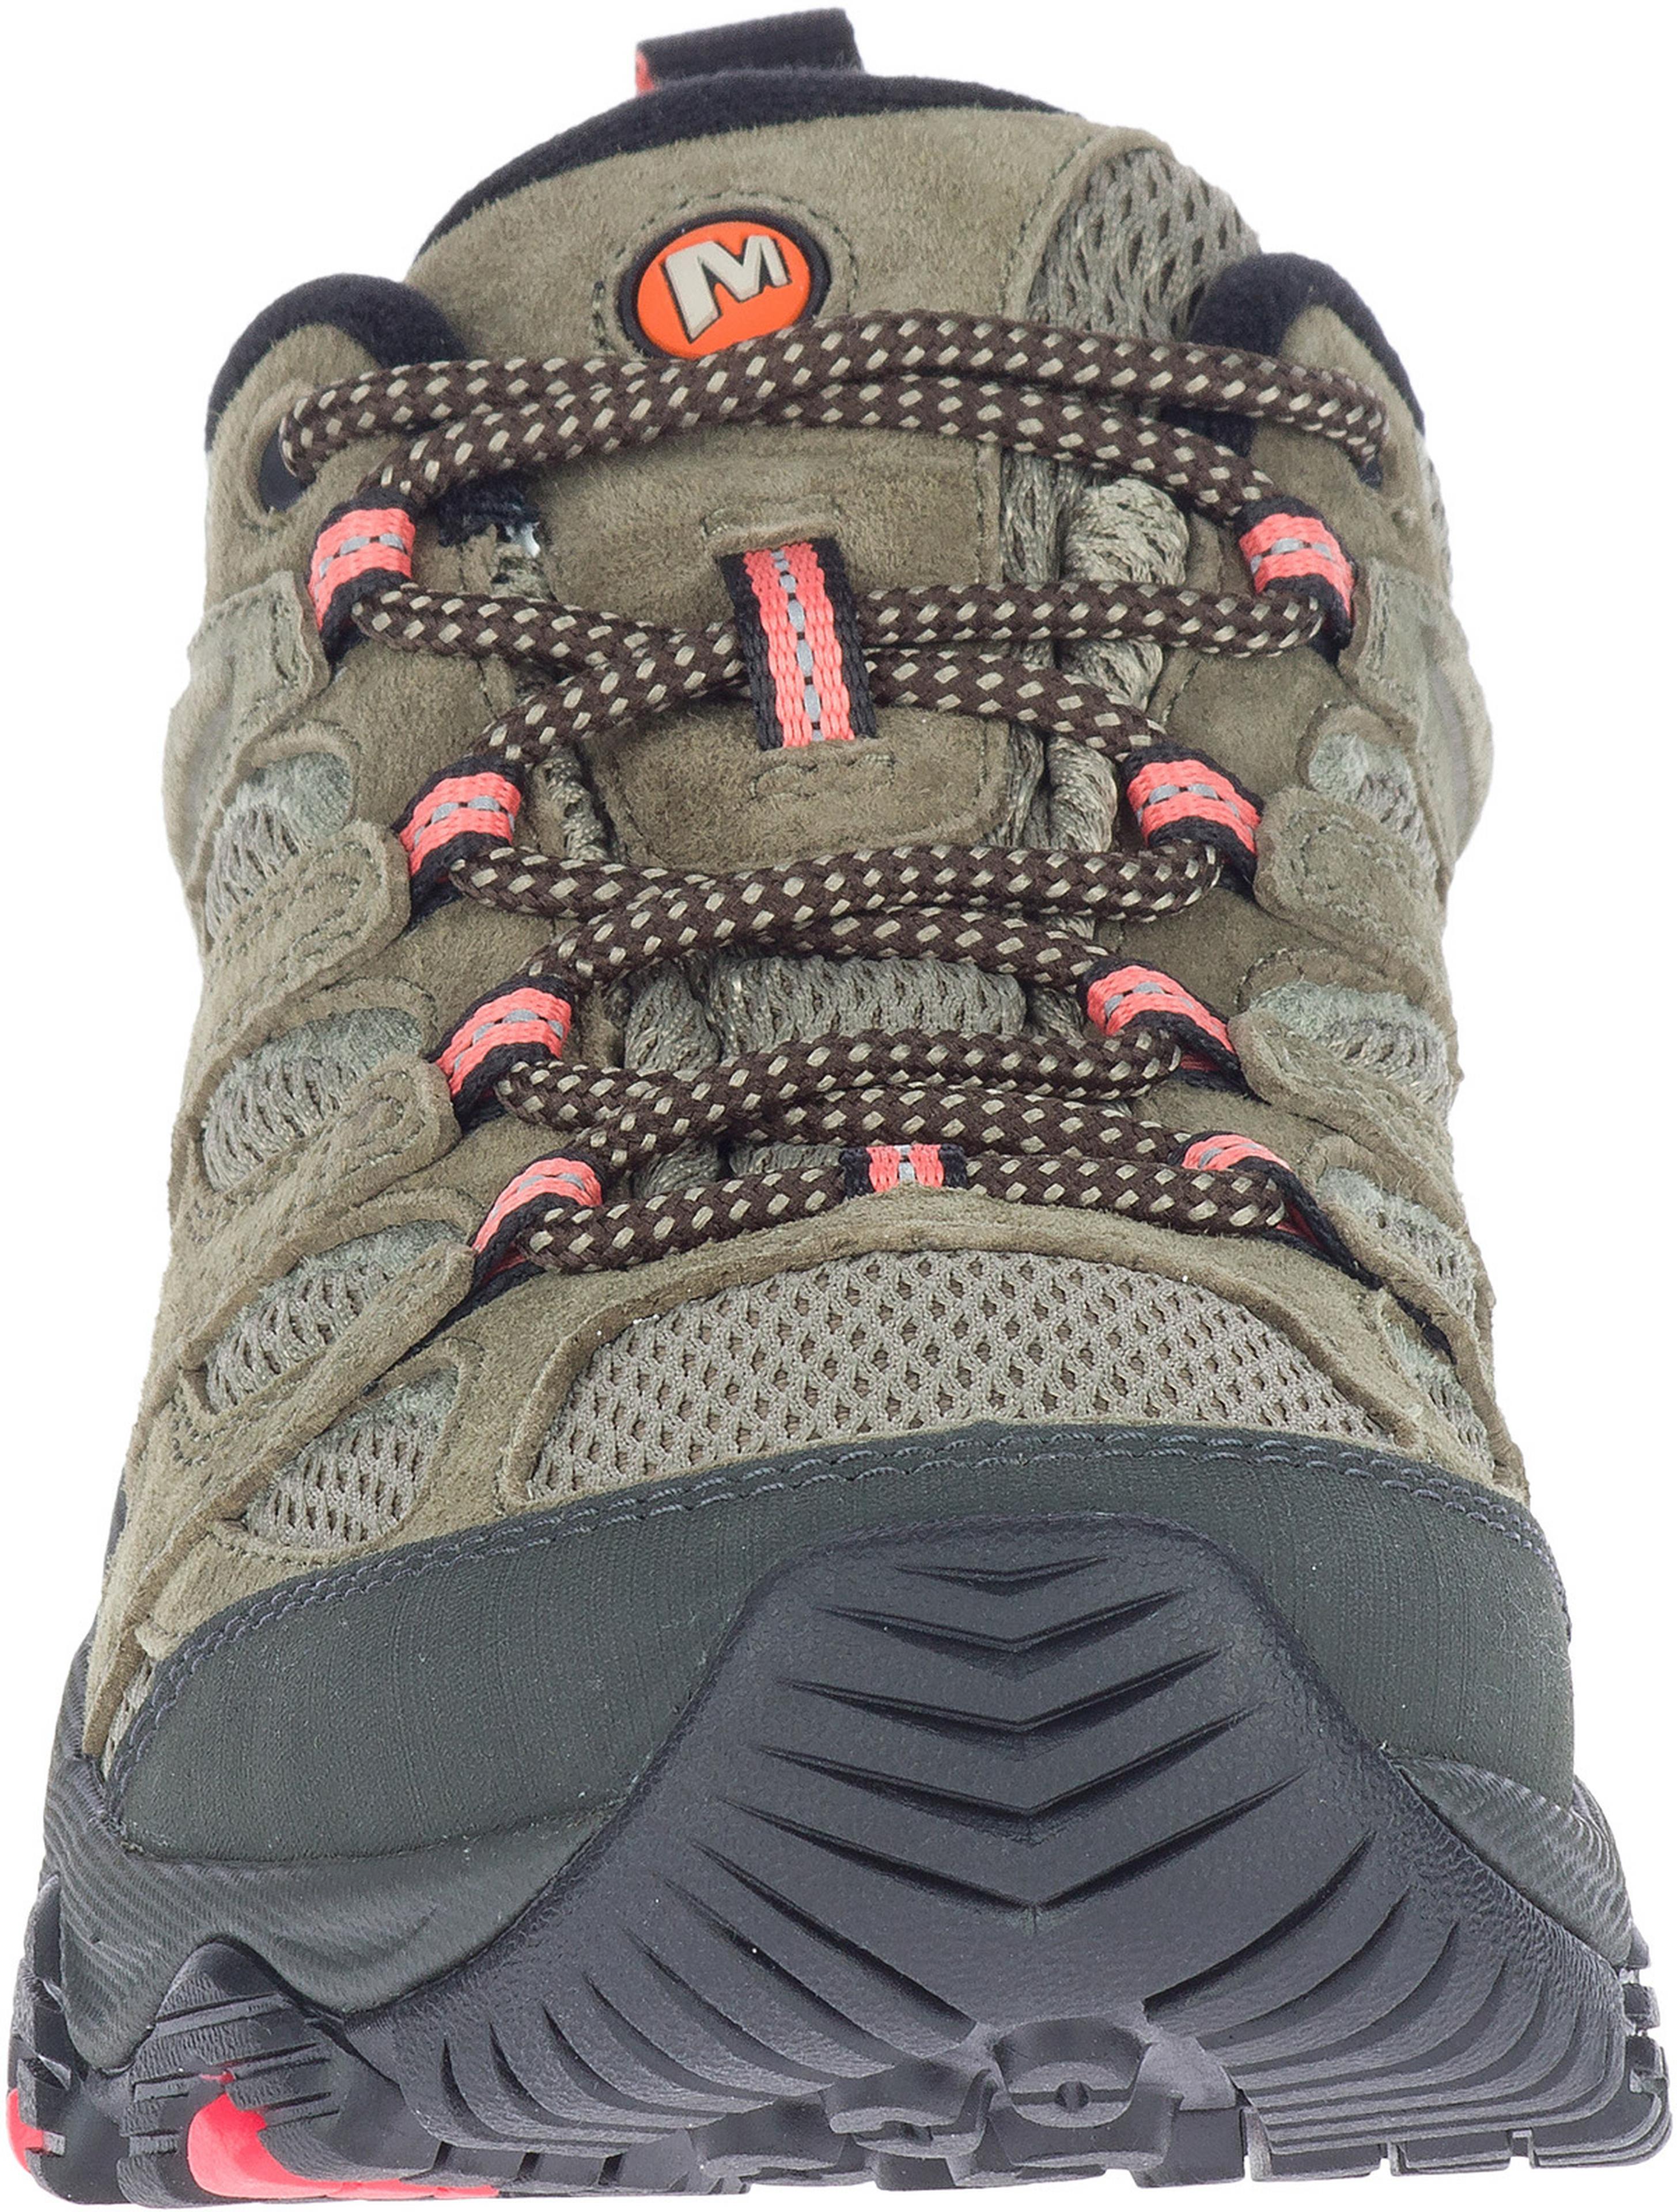 Merrell Moab 3 GTX - Multisport shoes Women's, Free EU Delivery